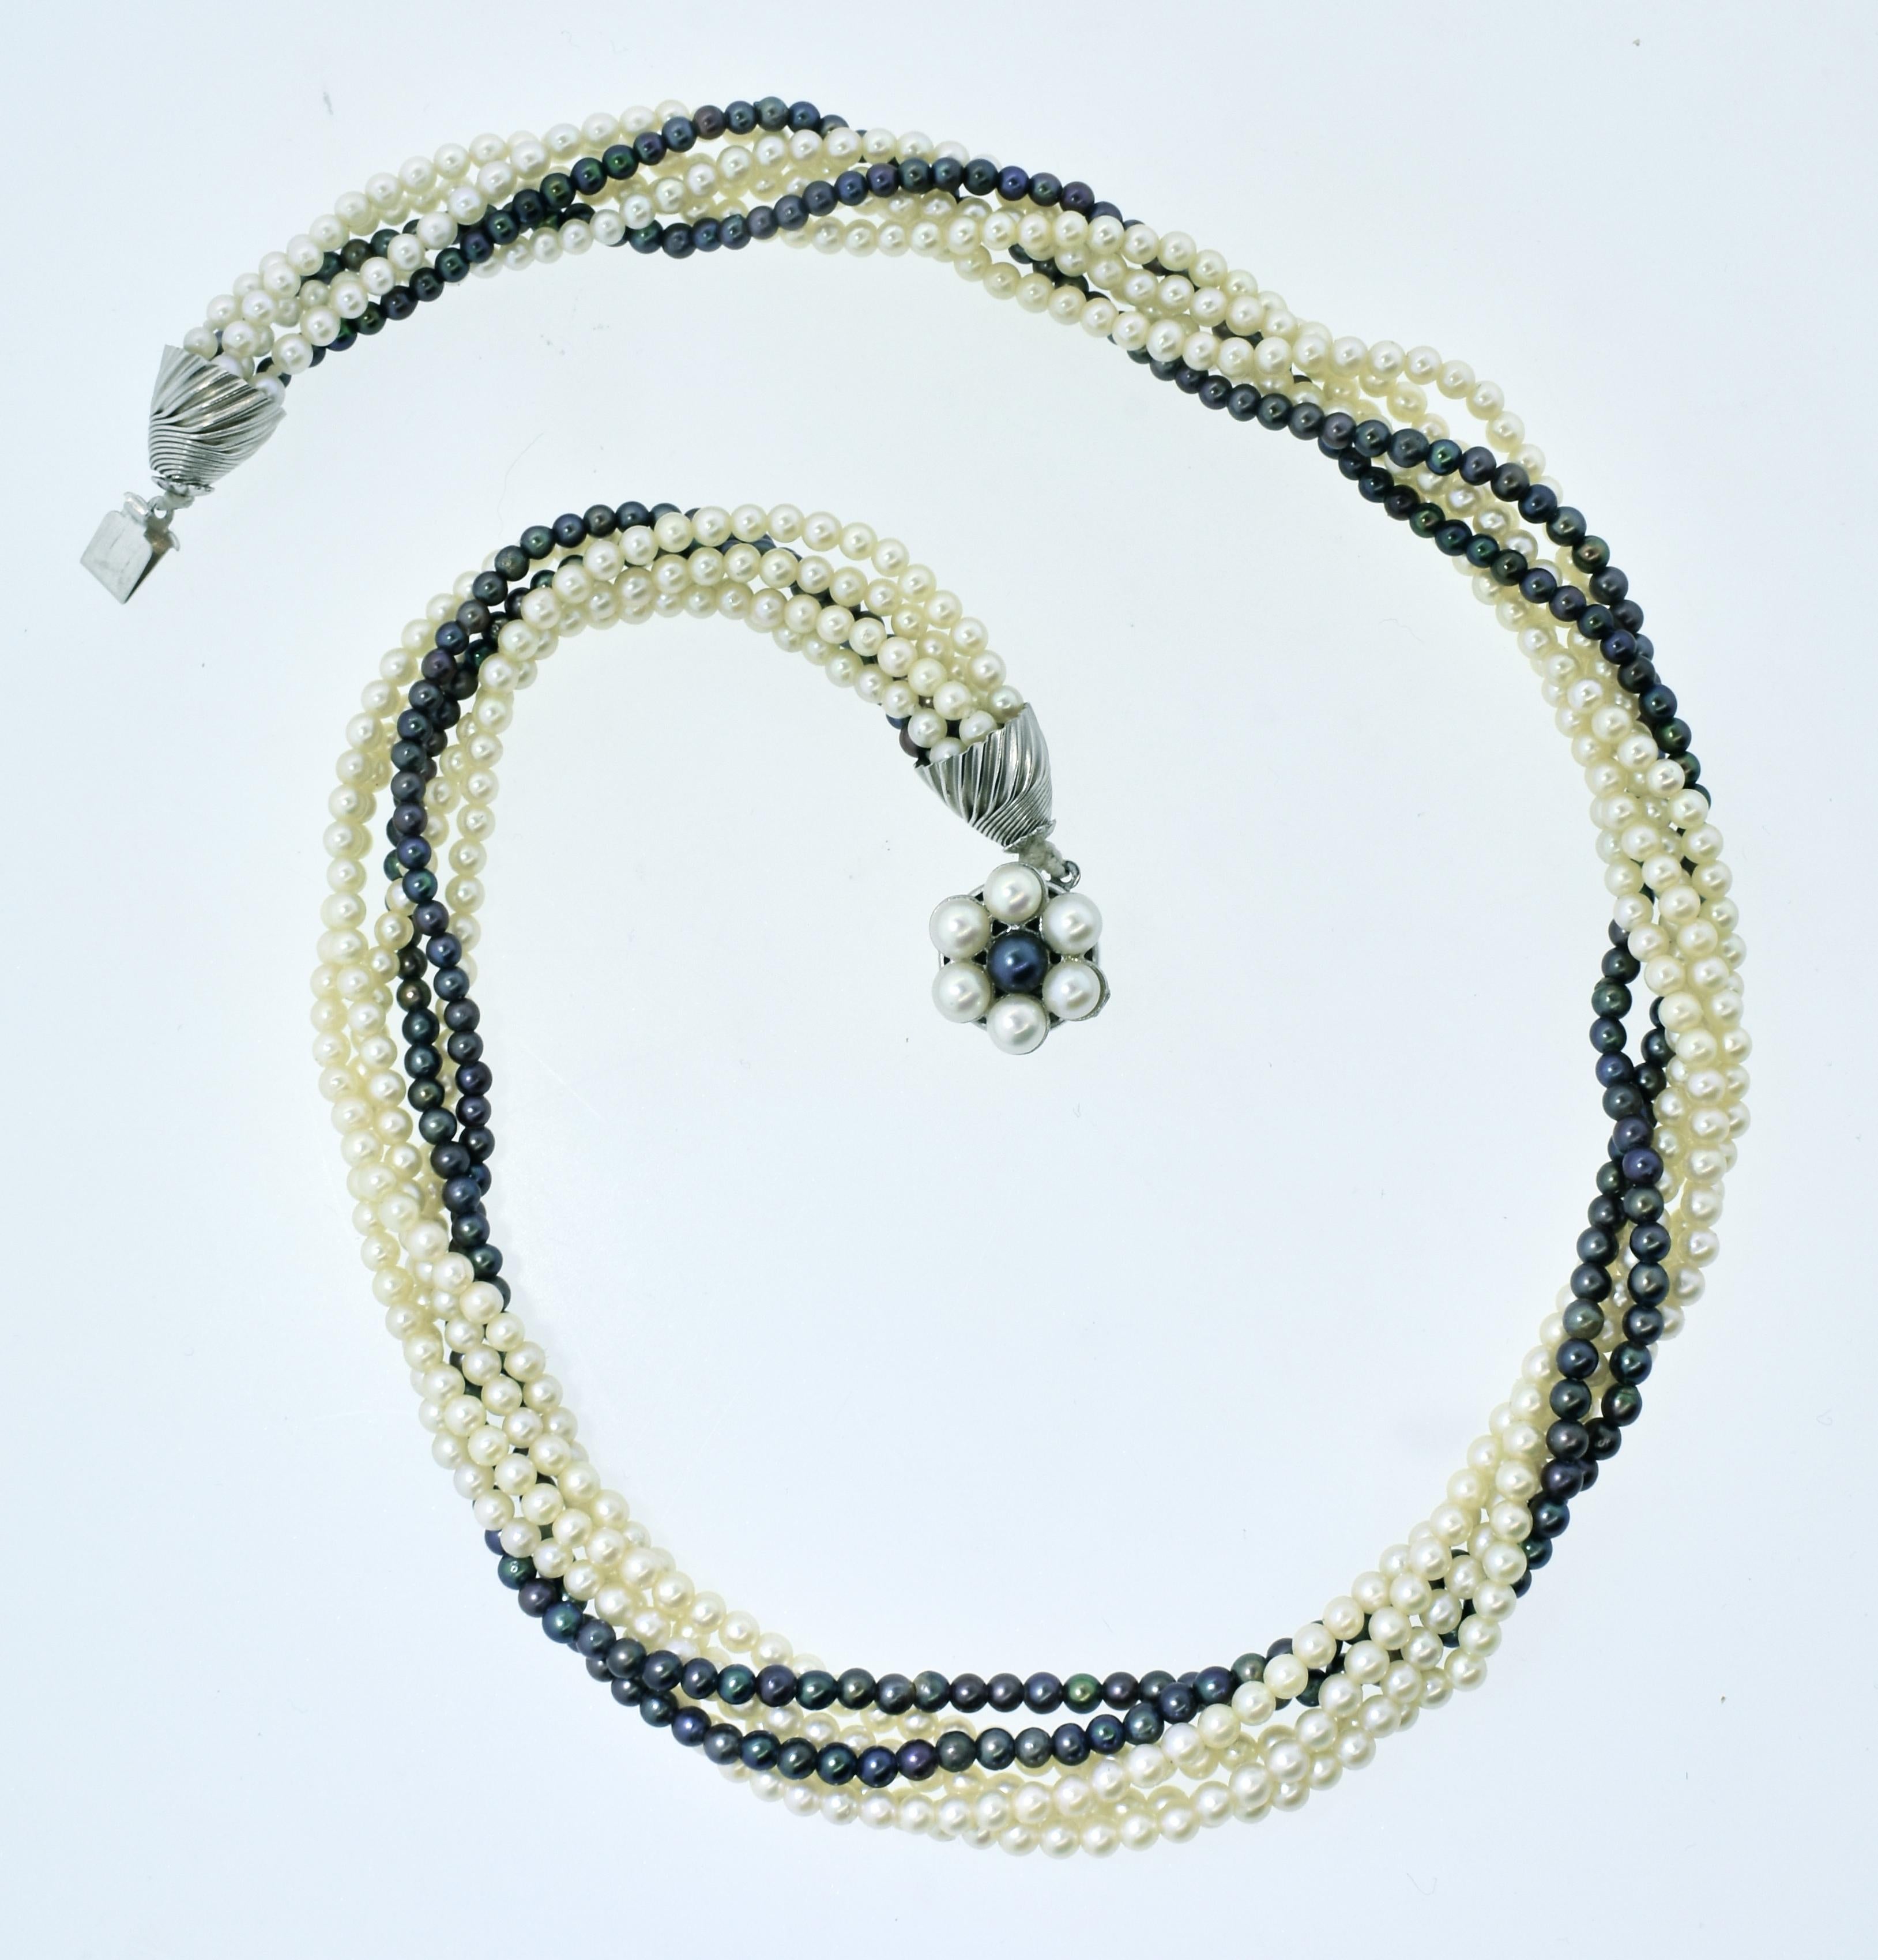 Pearl necklace possessing both fine white pearls and black pearls.  These pearls range in size from 2.5 mm. to 3.0 mm.  One can wear this lovely necklace slightly twisted or more so depending on the long and length one would like to achieve.  Either